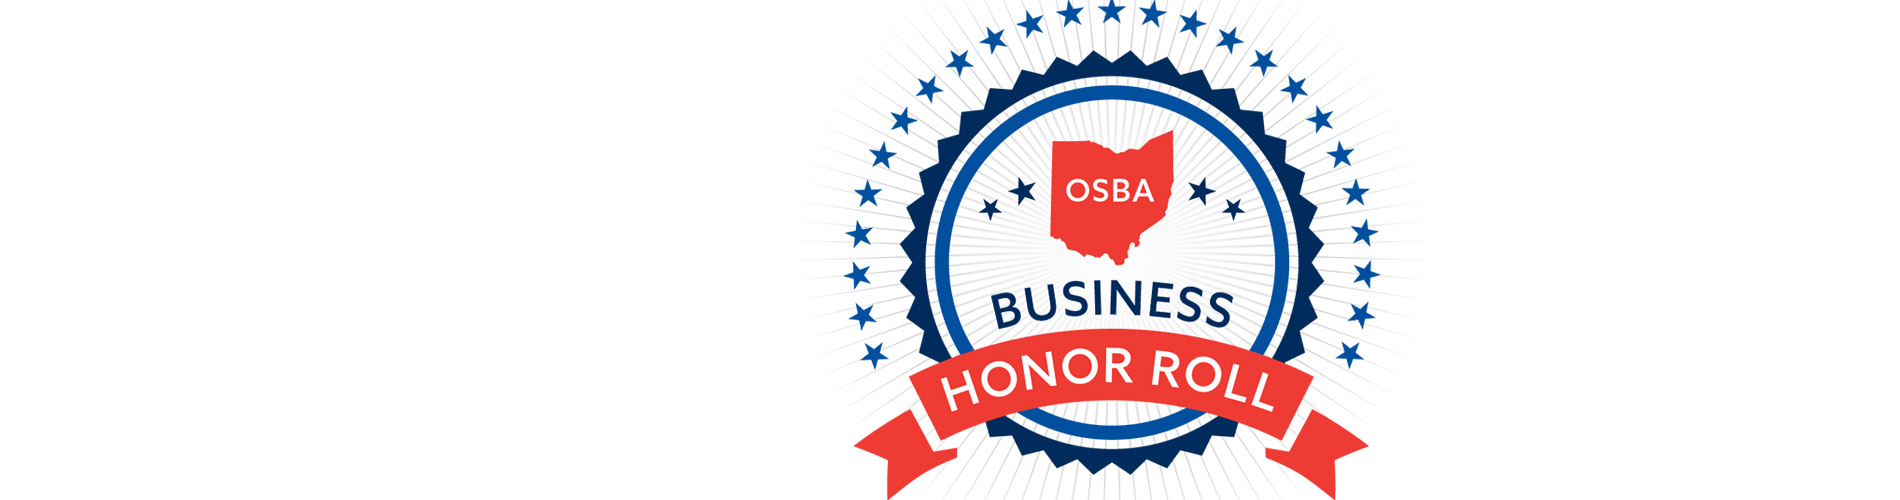 Business Honor Roll logo